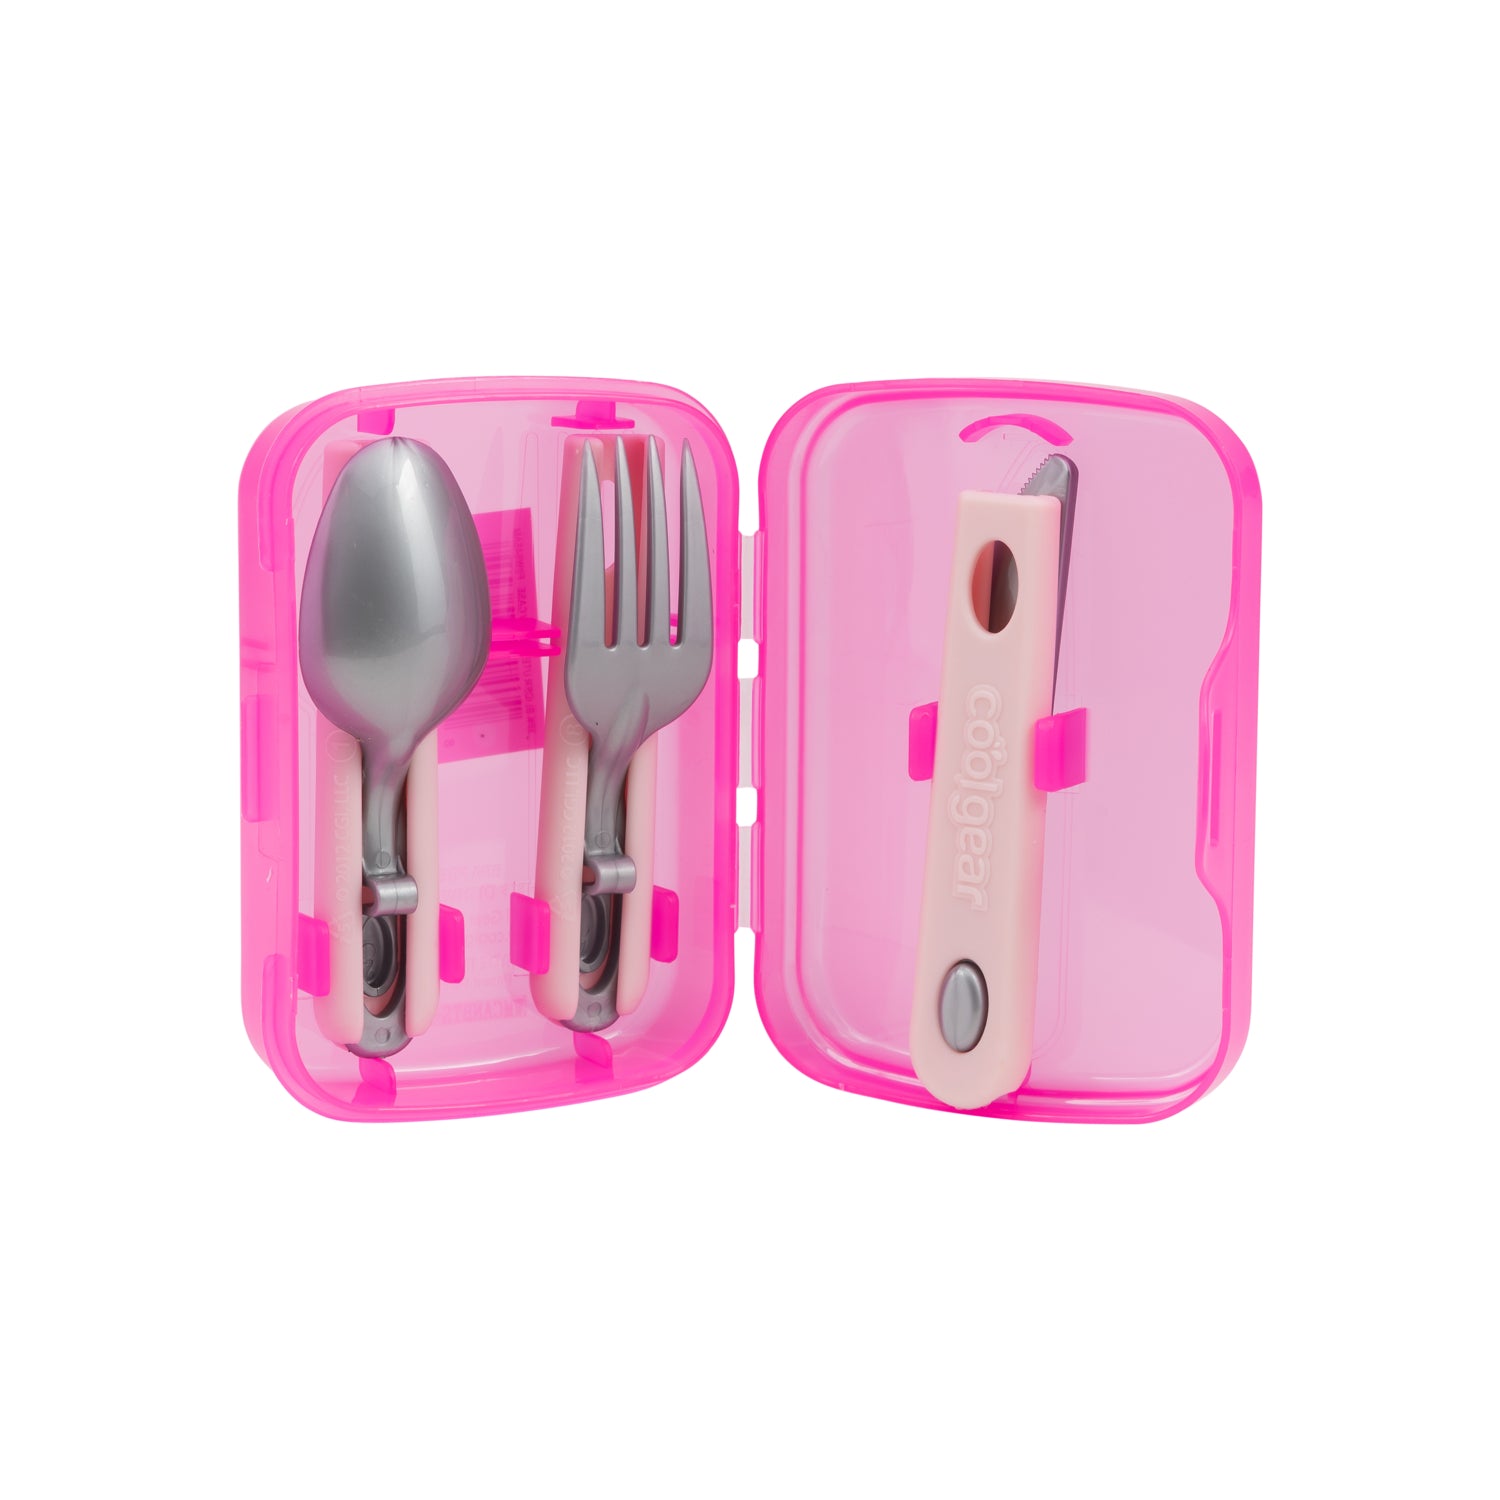 Travel Utensils With Case, Reusable Utensils Set With Case, Lunch